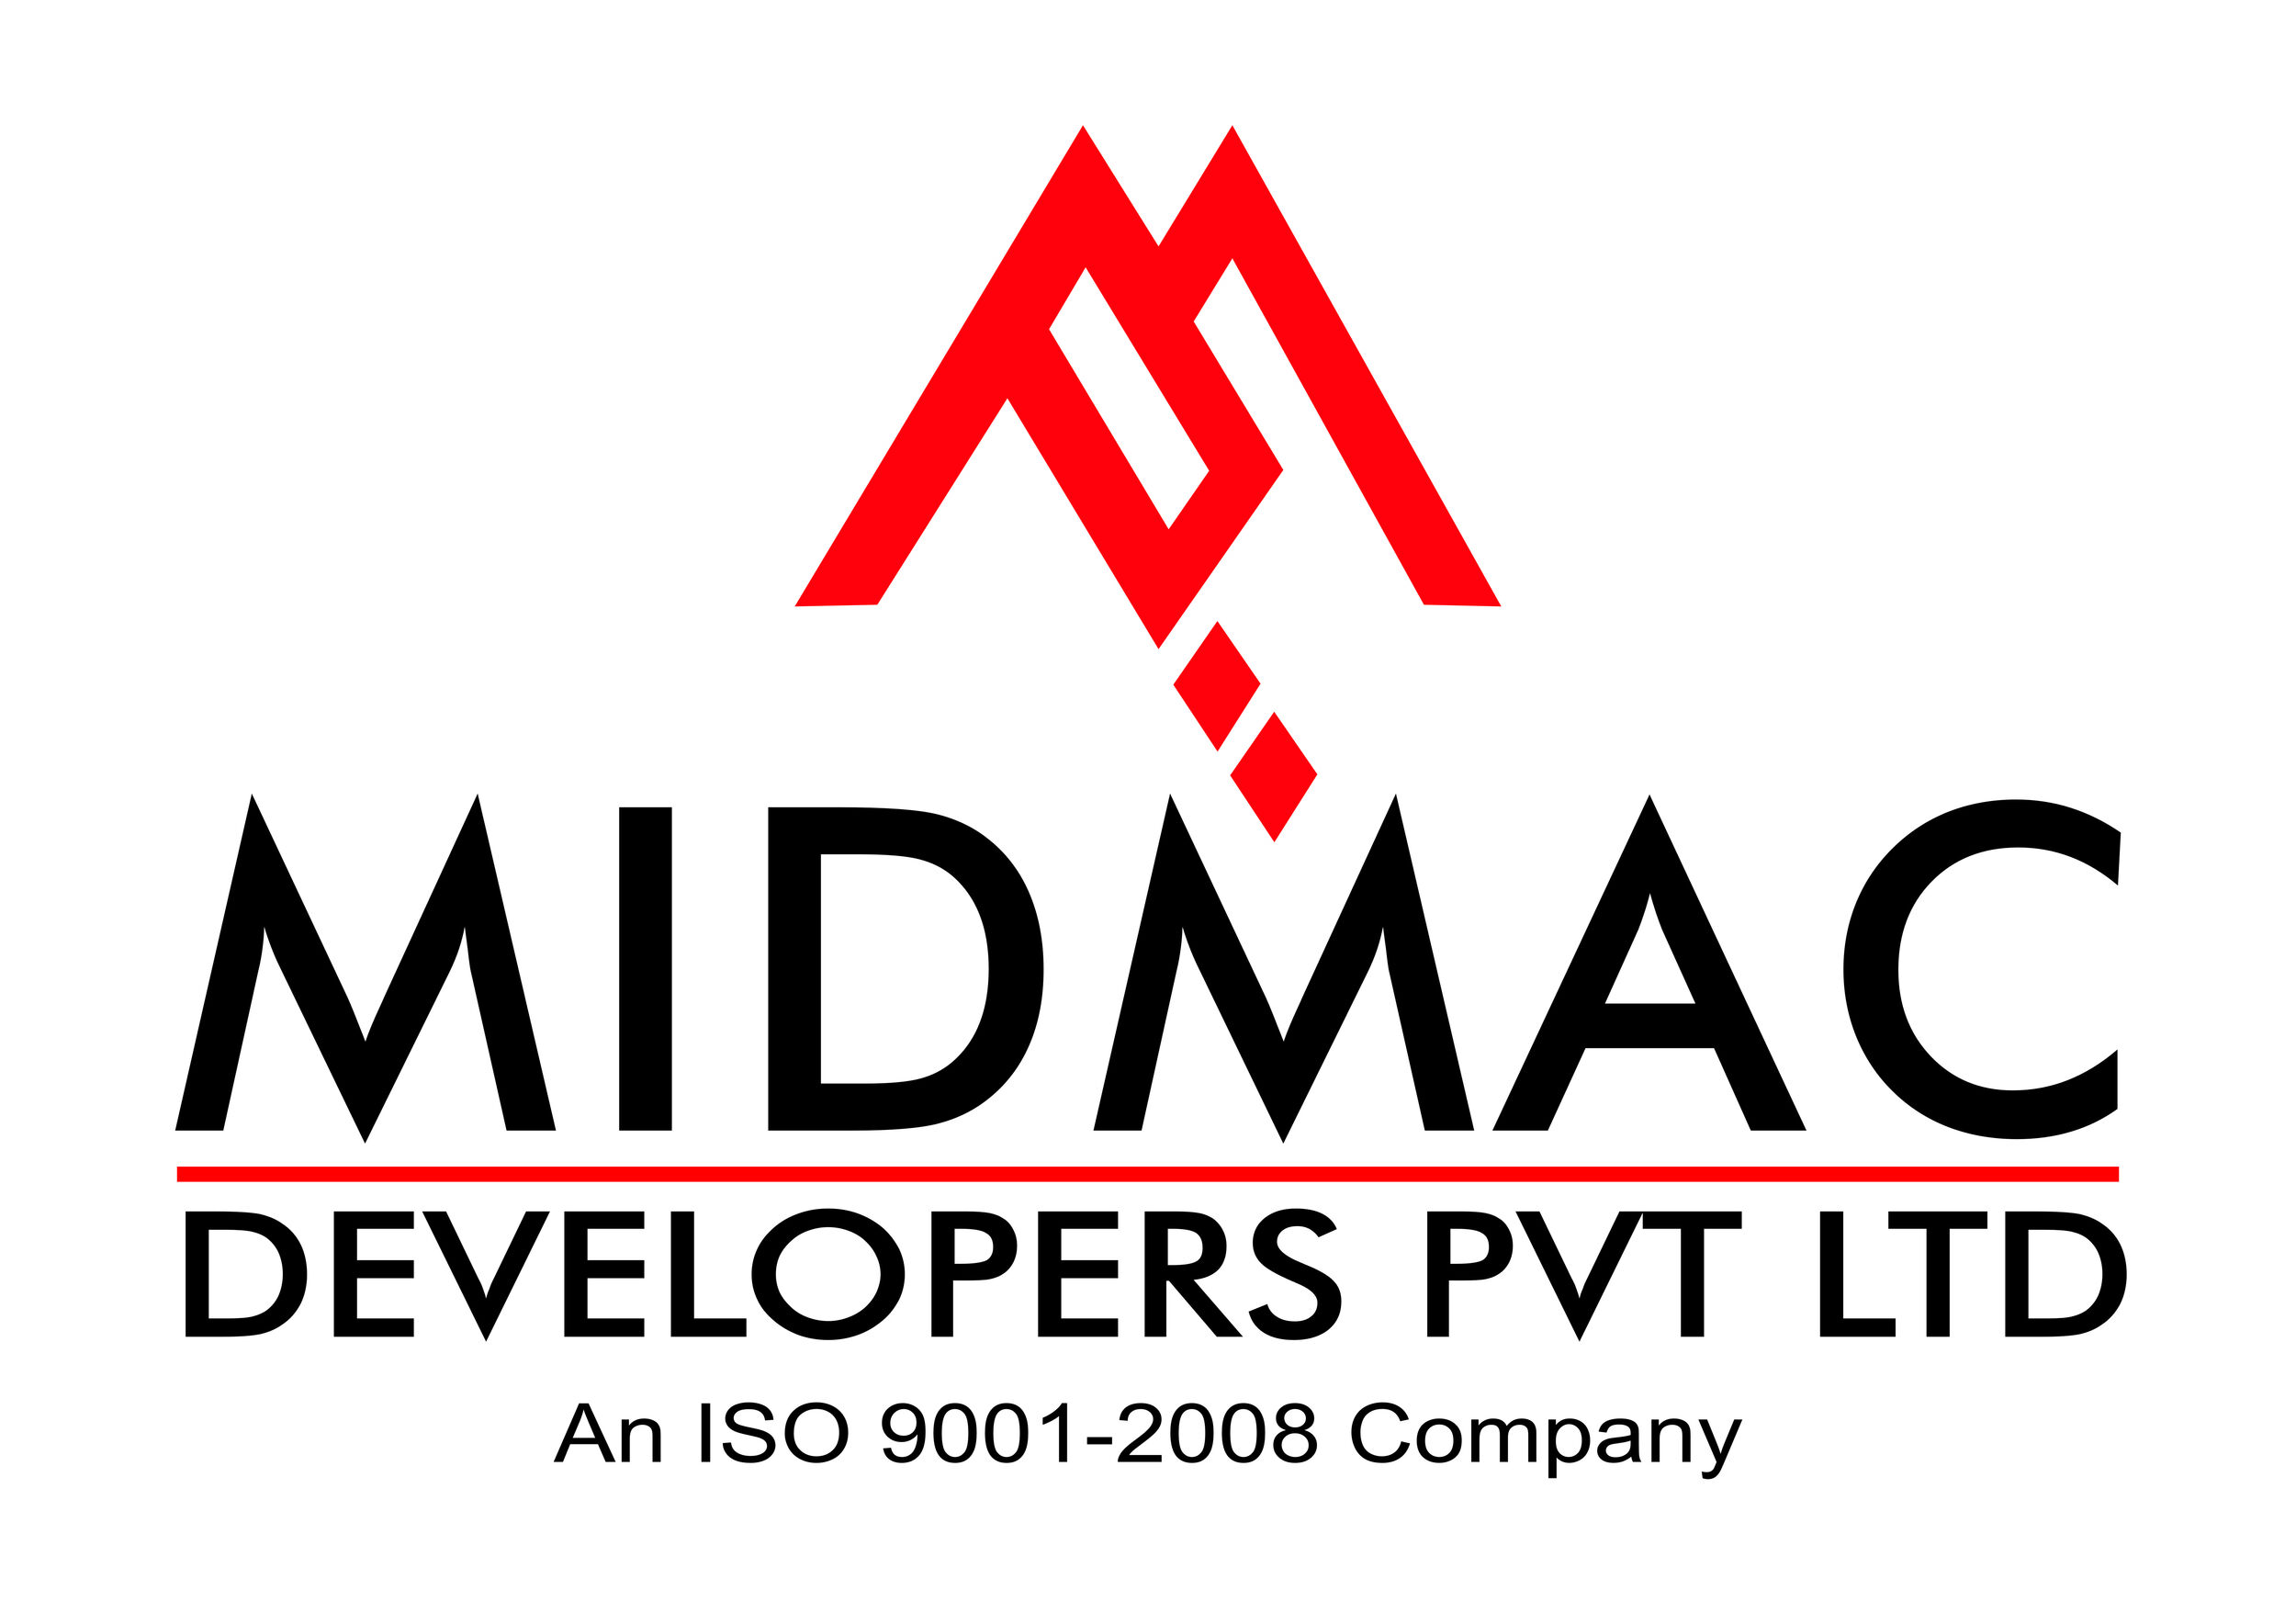 Welcome to Midmac Developers Pvt. Ltd.